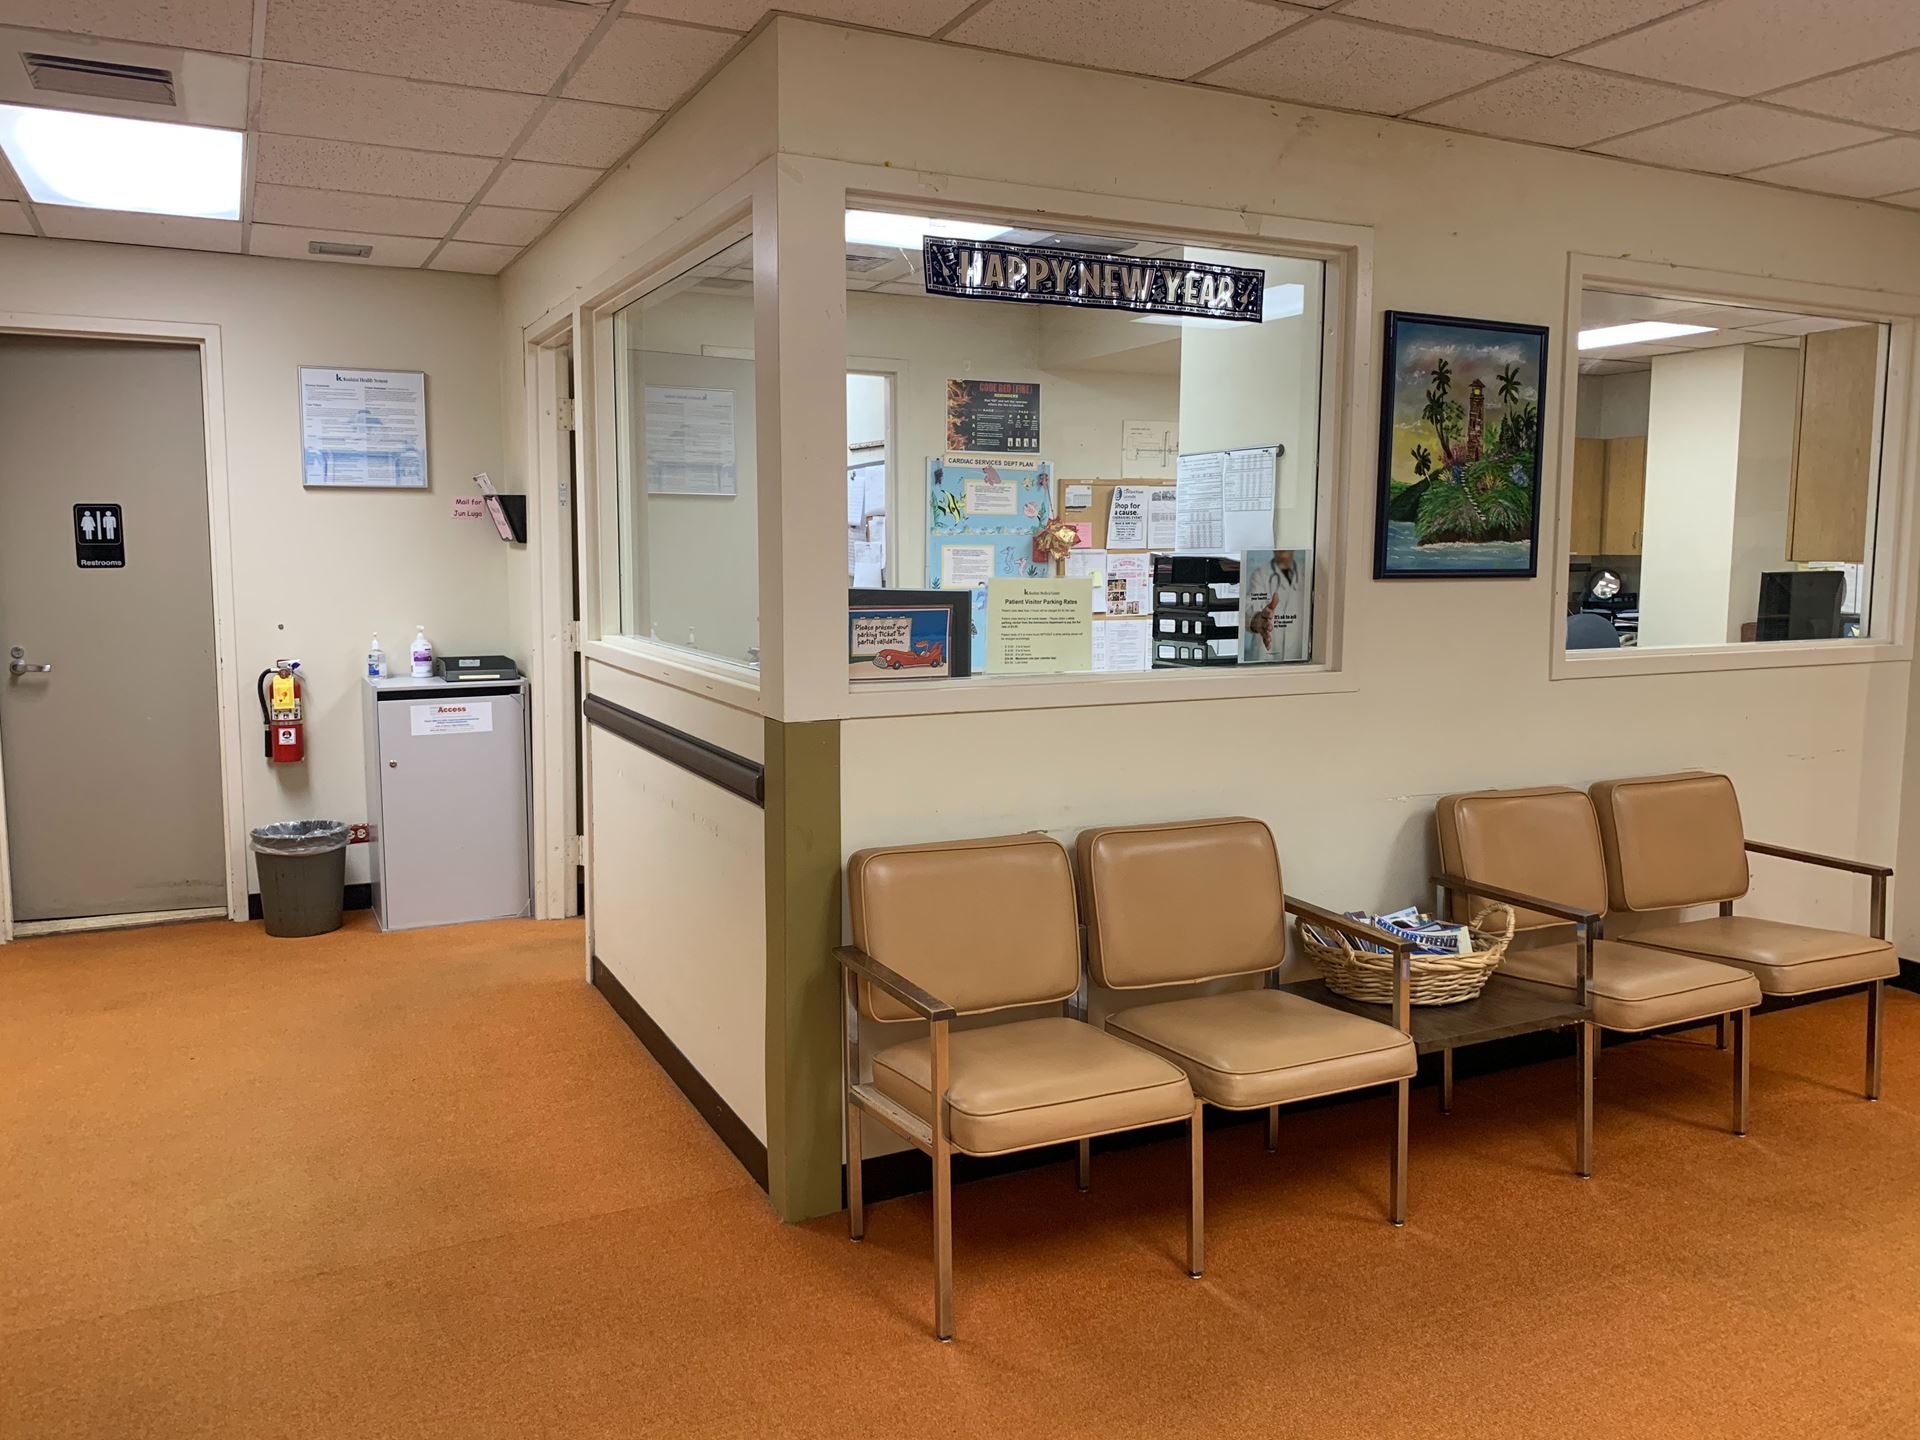 An image of a hospital waiting room, with empty chairs